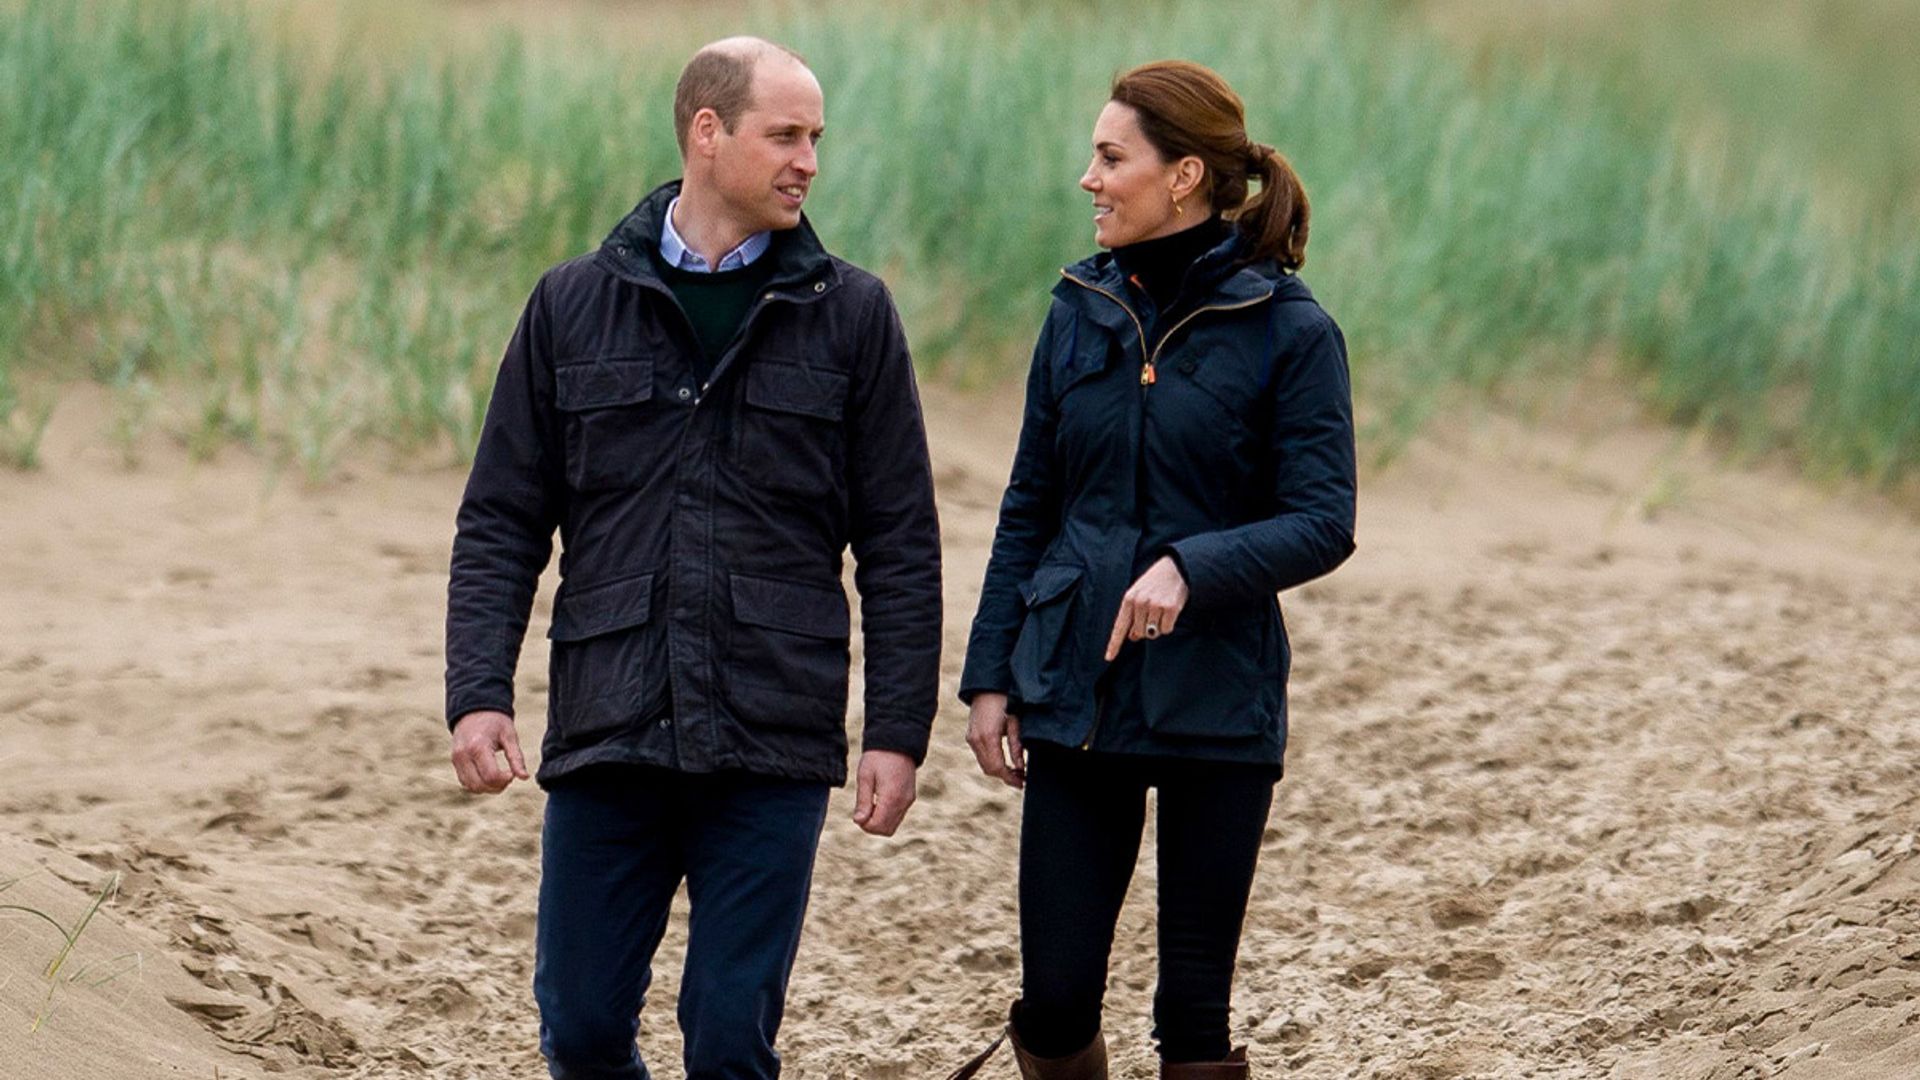 Prince William and Kate Middleton holidayed at Hollywood movie set - and nobody knew